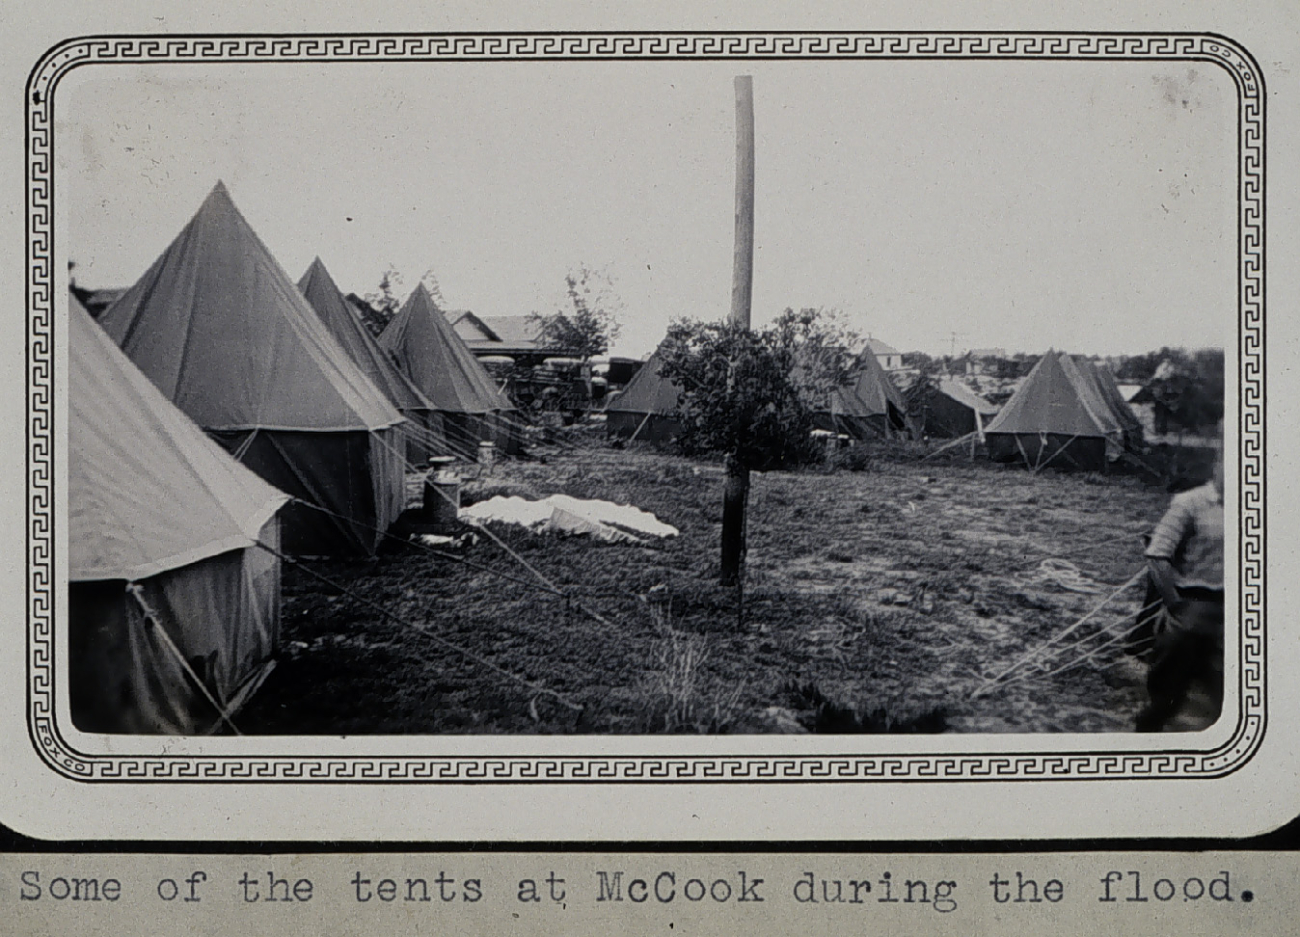 The camp at McCook during the floods along the Republican River